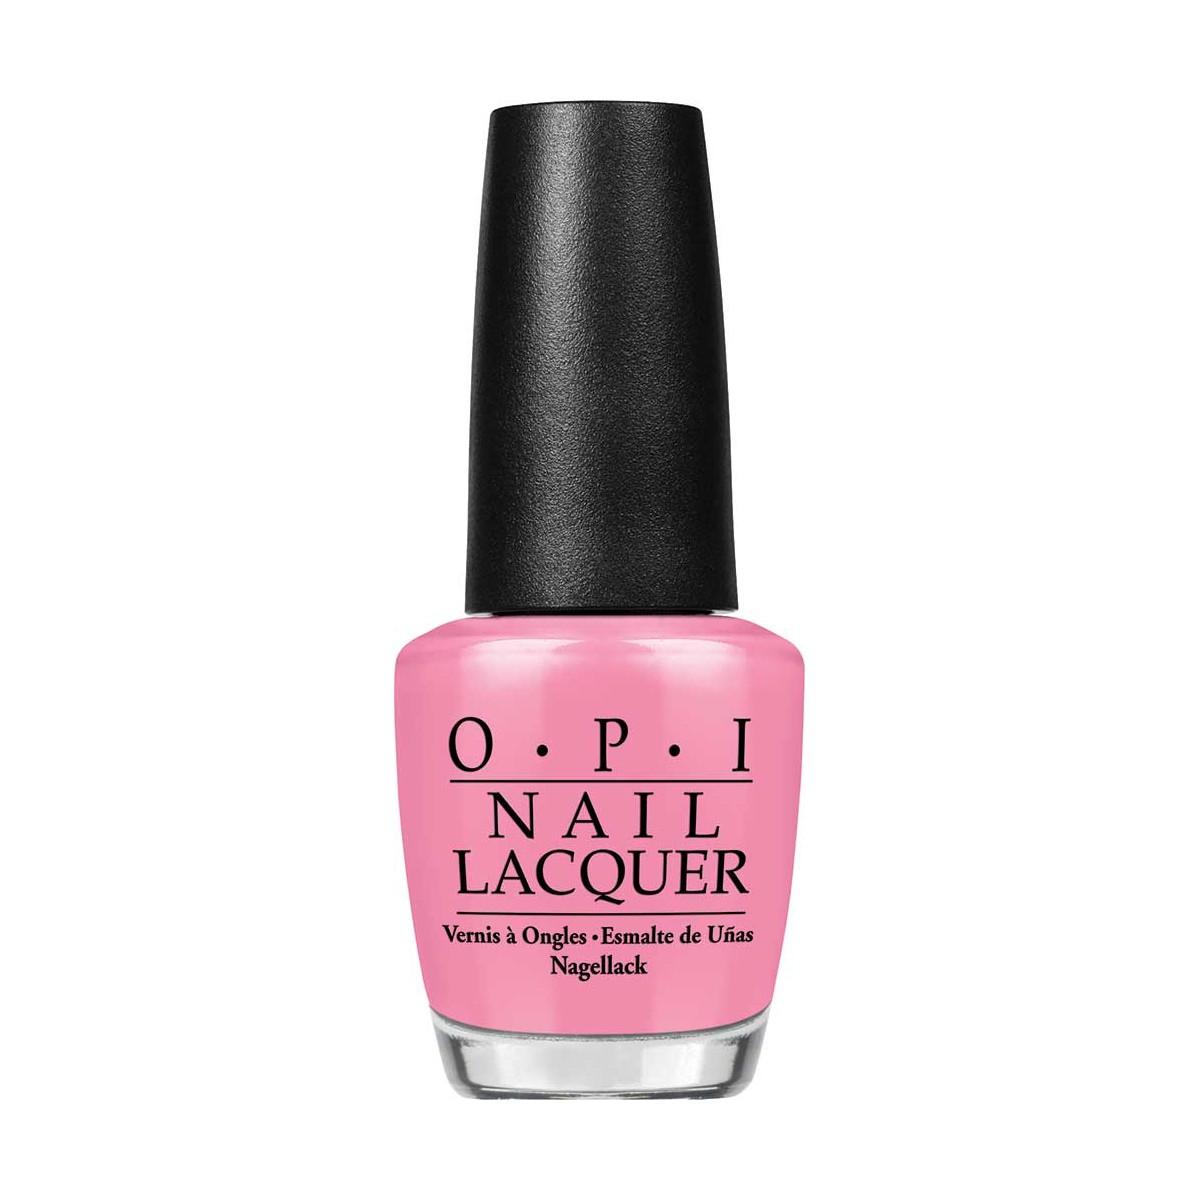 opi-nail-lacquer-nlg01-aphrodite-s-pink-nightie